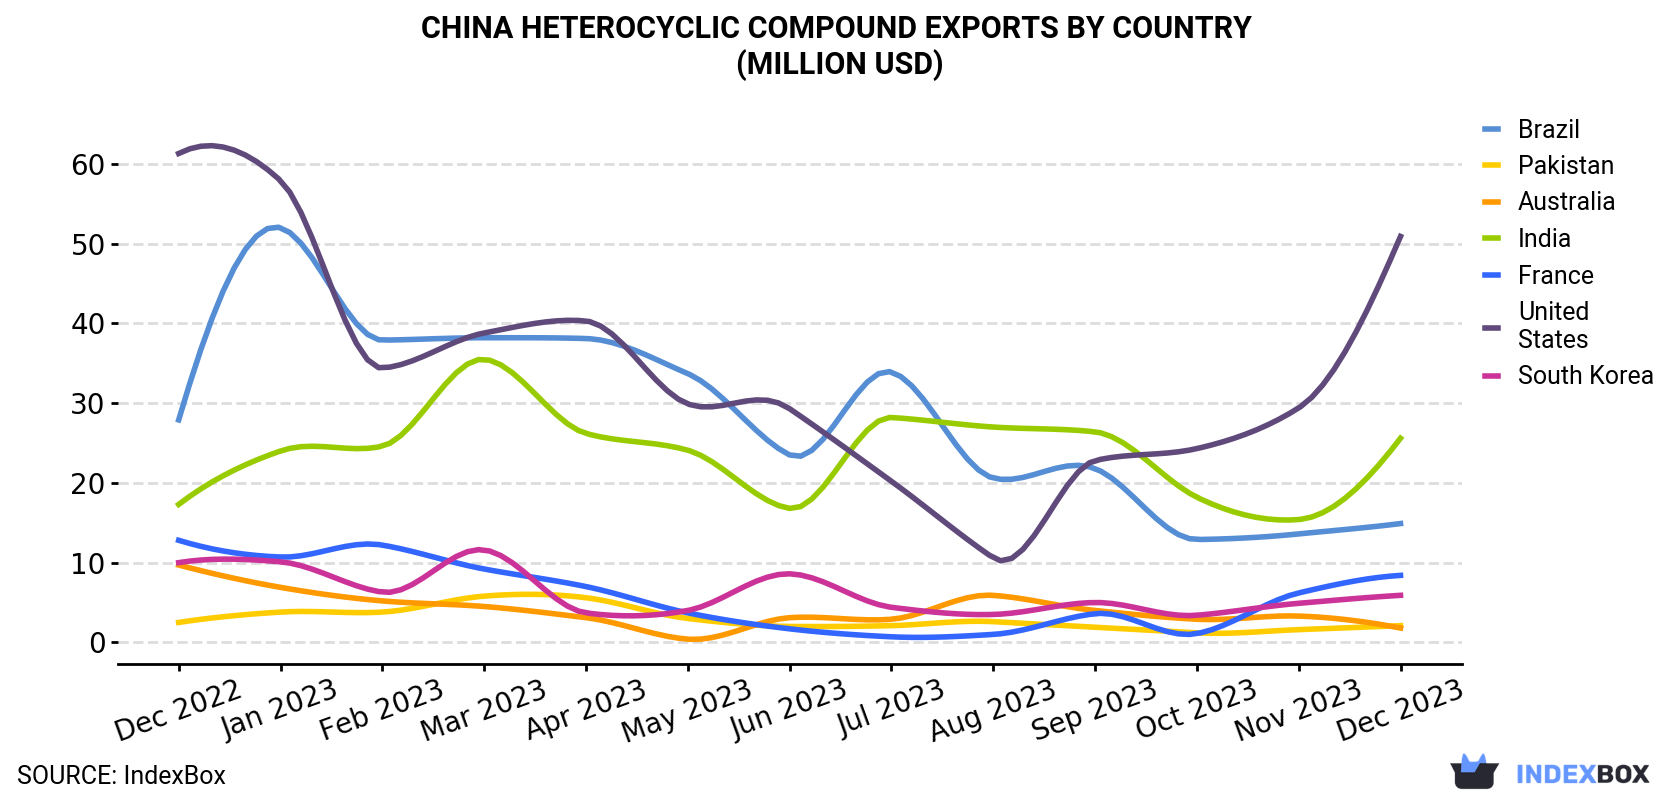 China Heterocyclic Compound Exports By Country (Million USD)